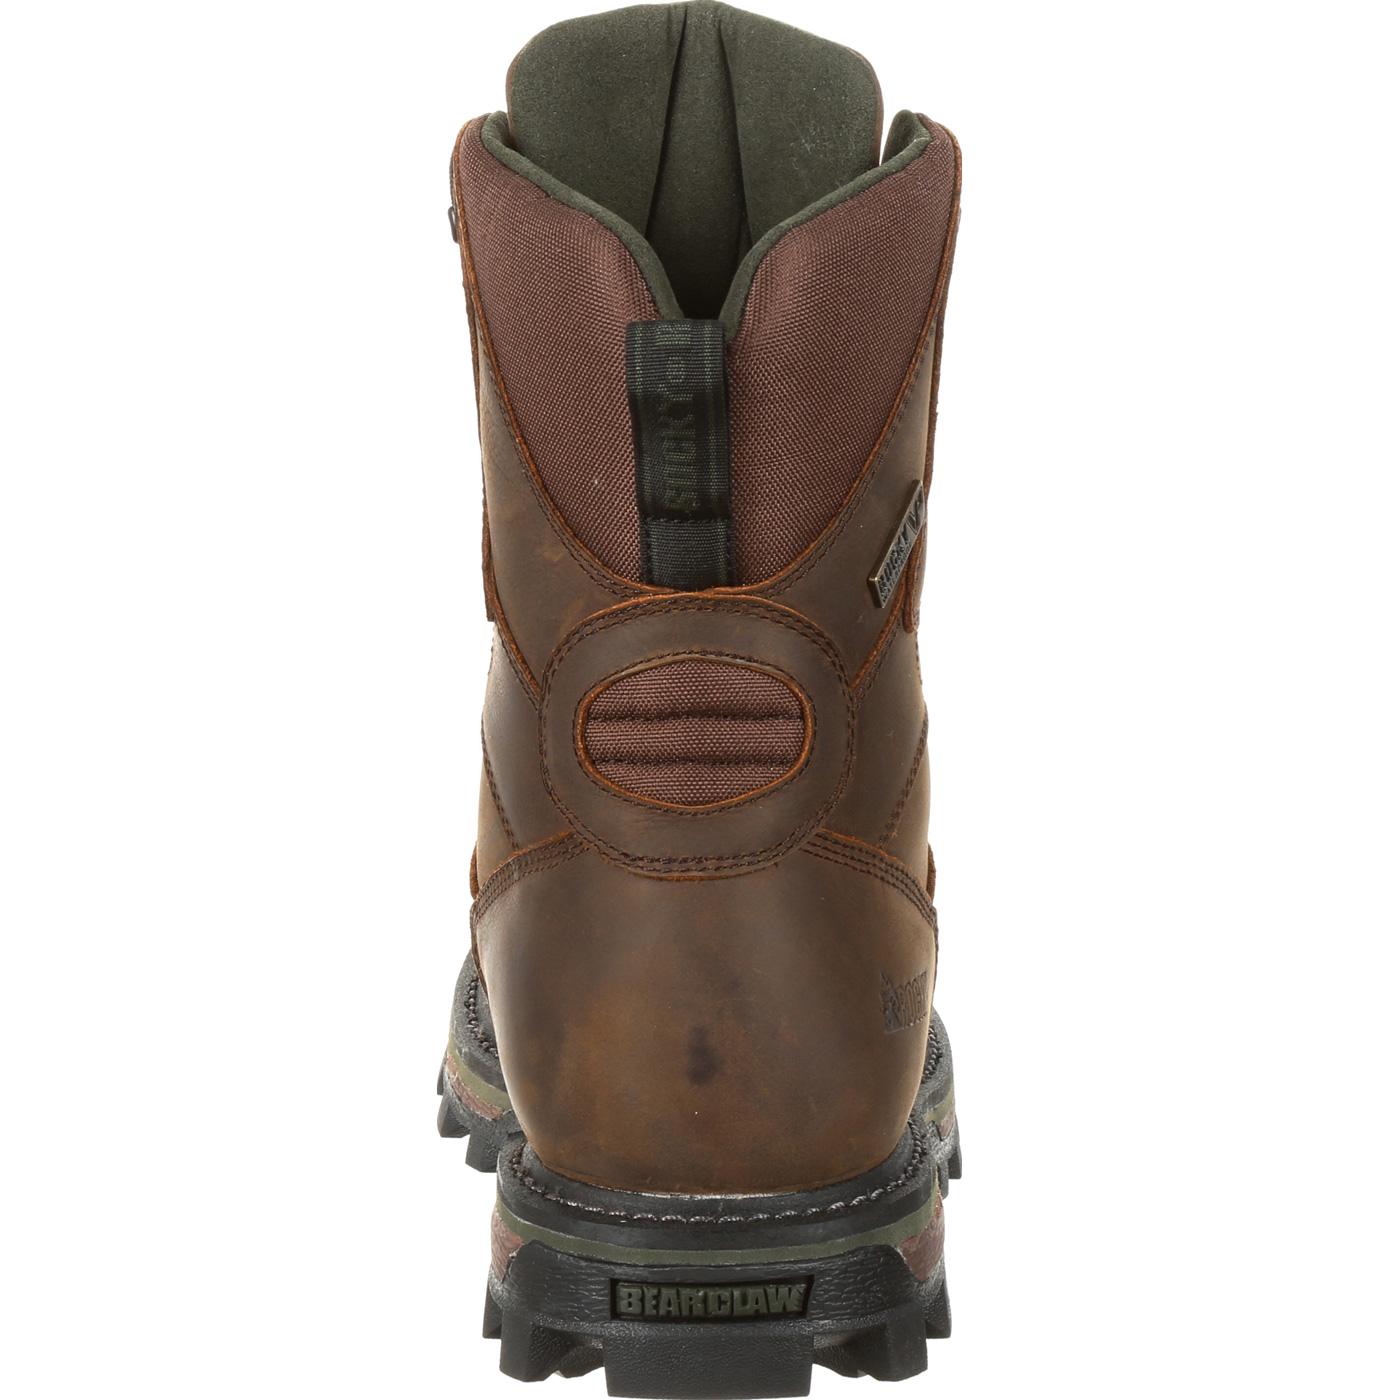 Rocky BearClaw FX 400G Insulated Waterproof Outdoor Boot, RKS0392